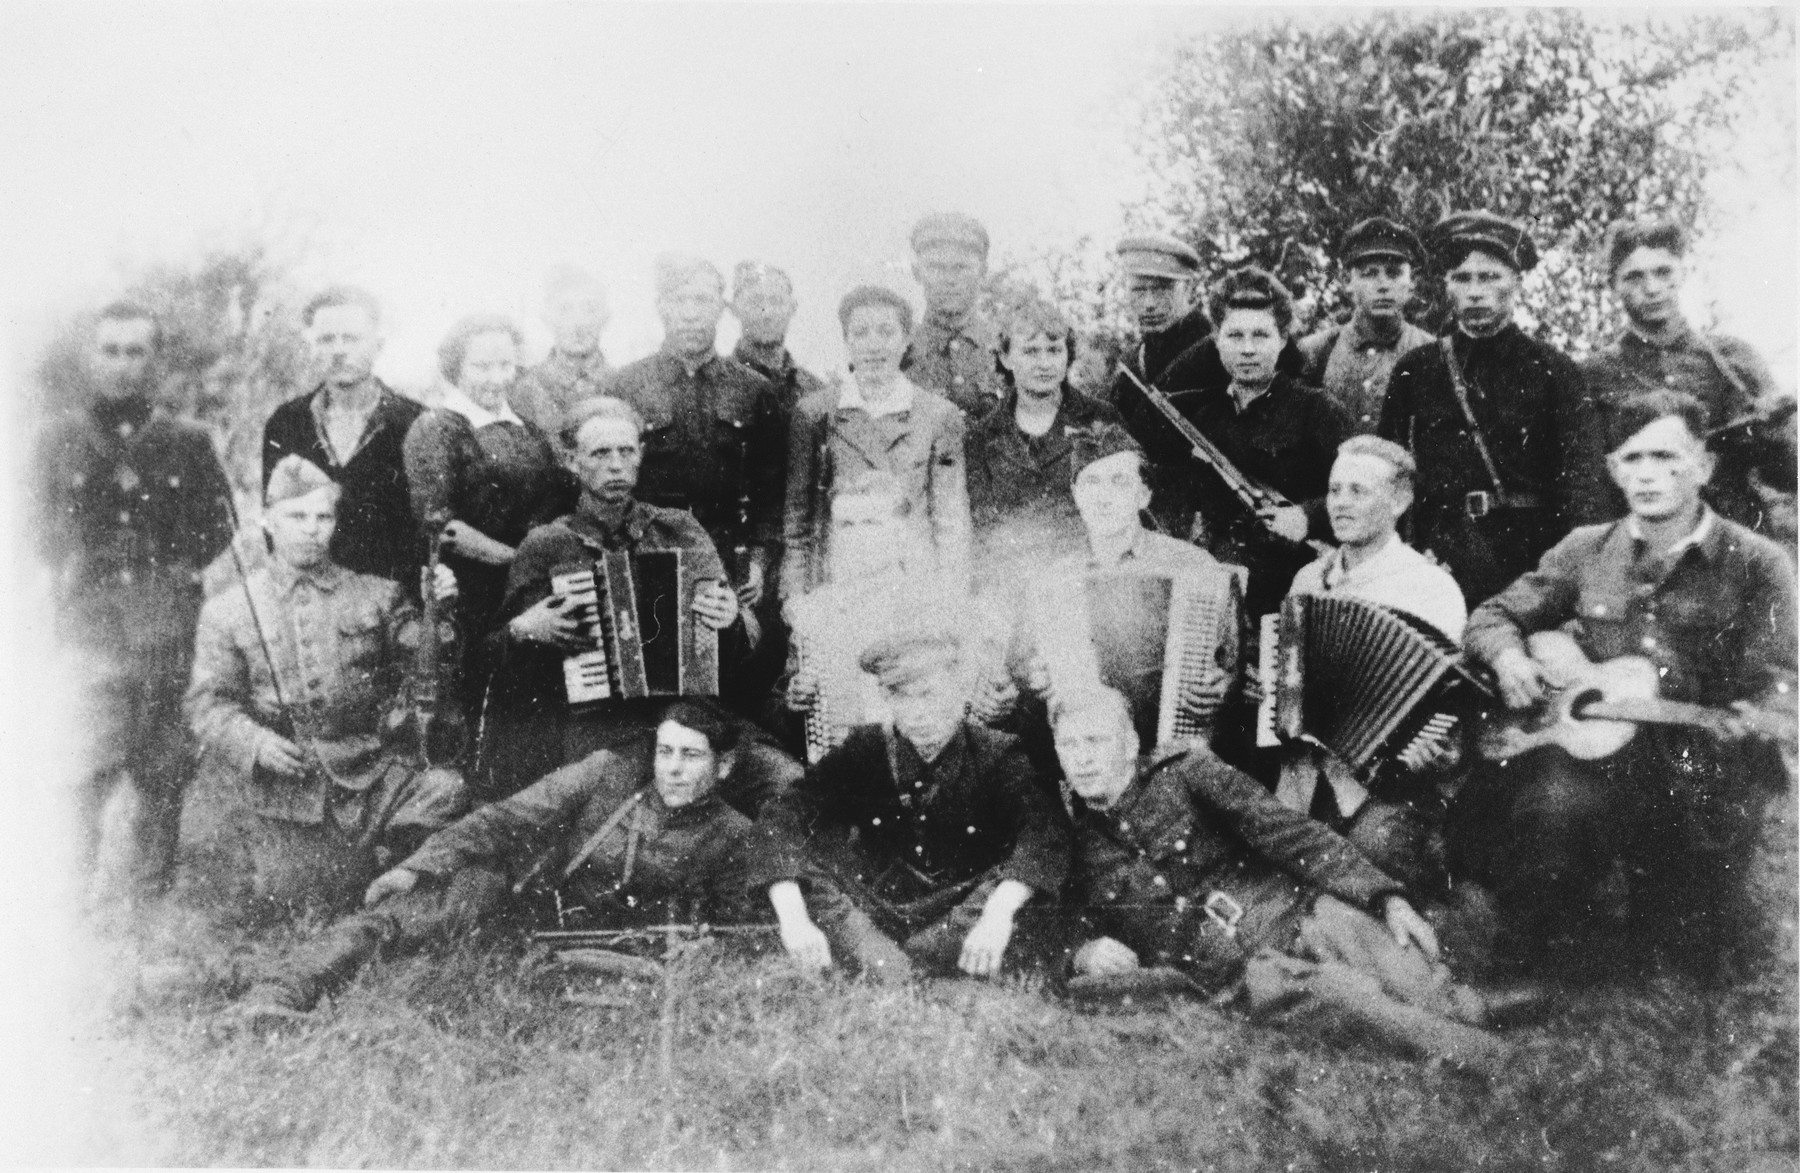 Group portrait of a Jewish partisan musical troupe in the Narocz Forest in Belorussia.  

Among those pictured are Hana Posner (standing in the back row, seventh from the left), her father, Mordechai Posner (fourth from the left) and Yechiel Burgin (sixth from the left).